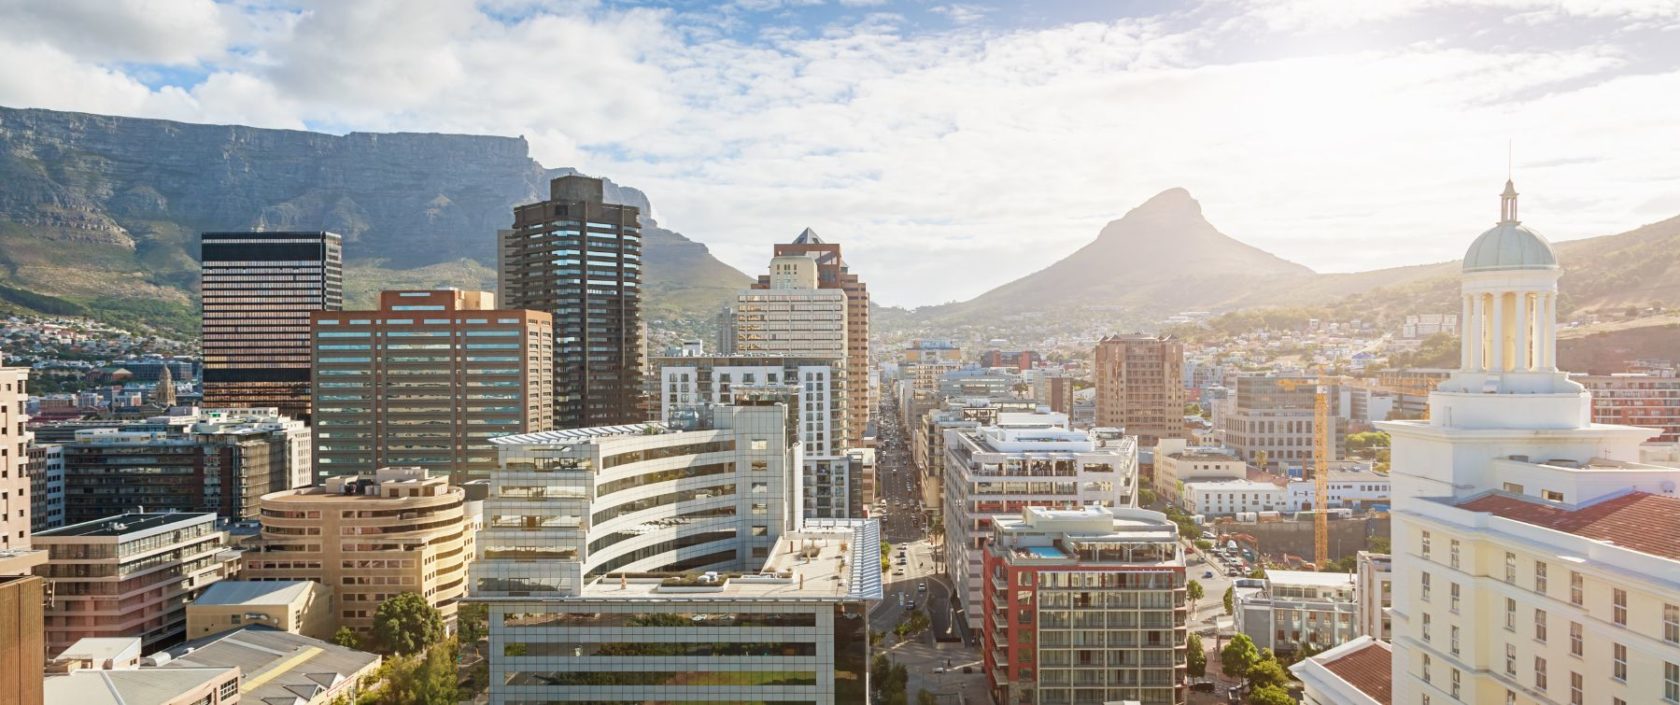 Downtown Cape Town, business district with skyscrapers and highrise buildings